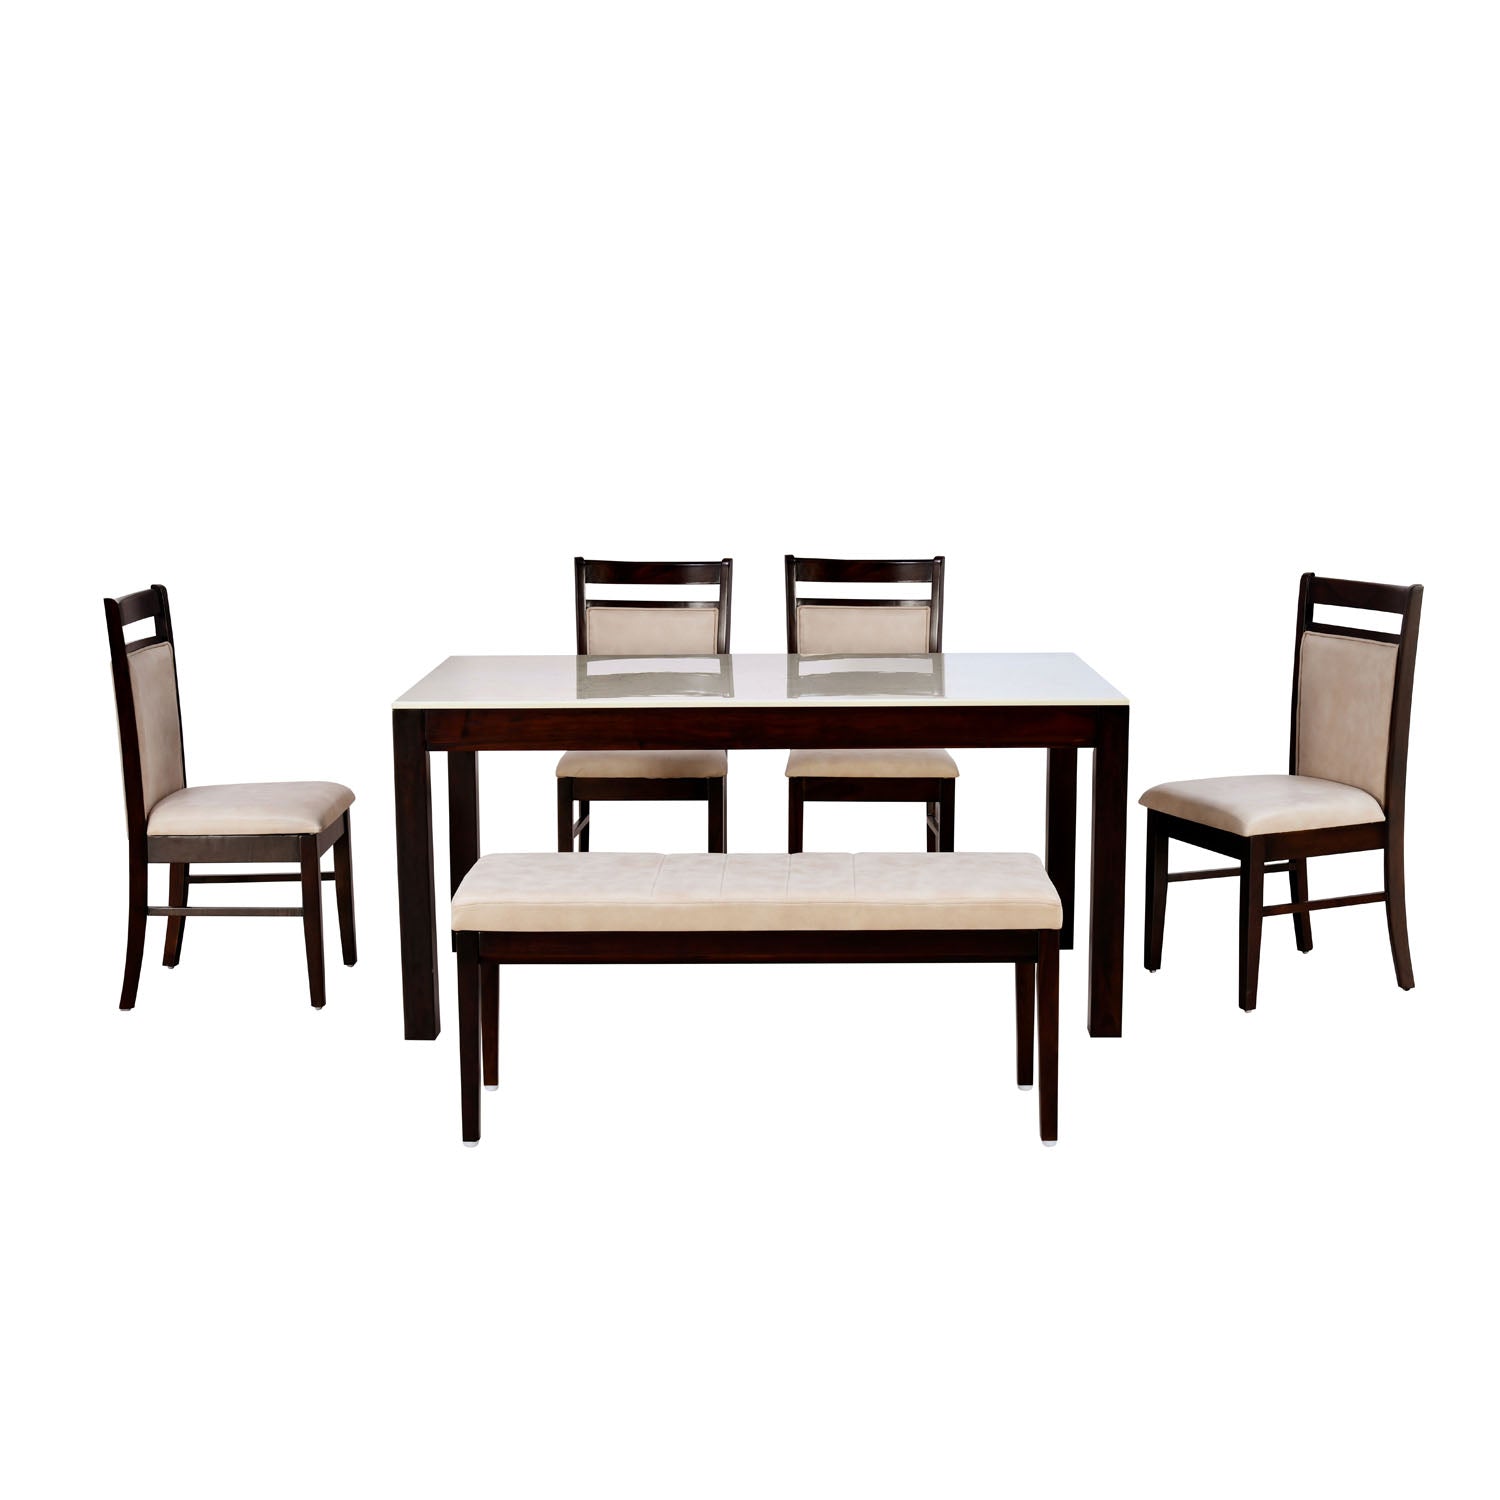 Pedro Ceramic Stone Top Solid Wood 6 Seater  Dining Set With Bench in Beige Finish